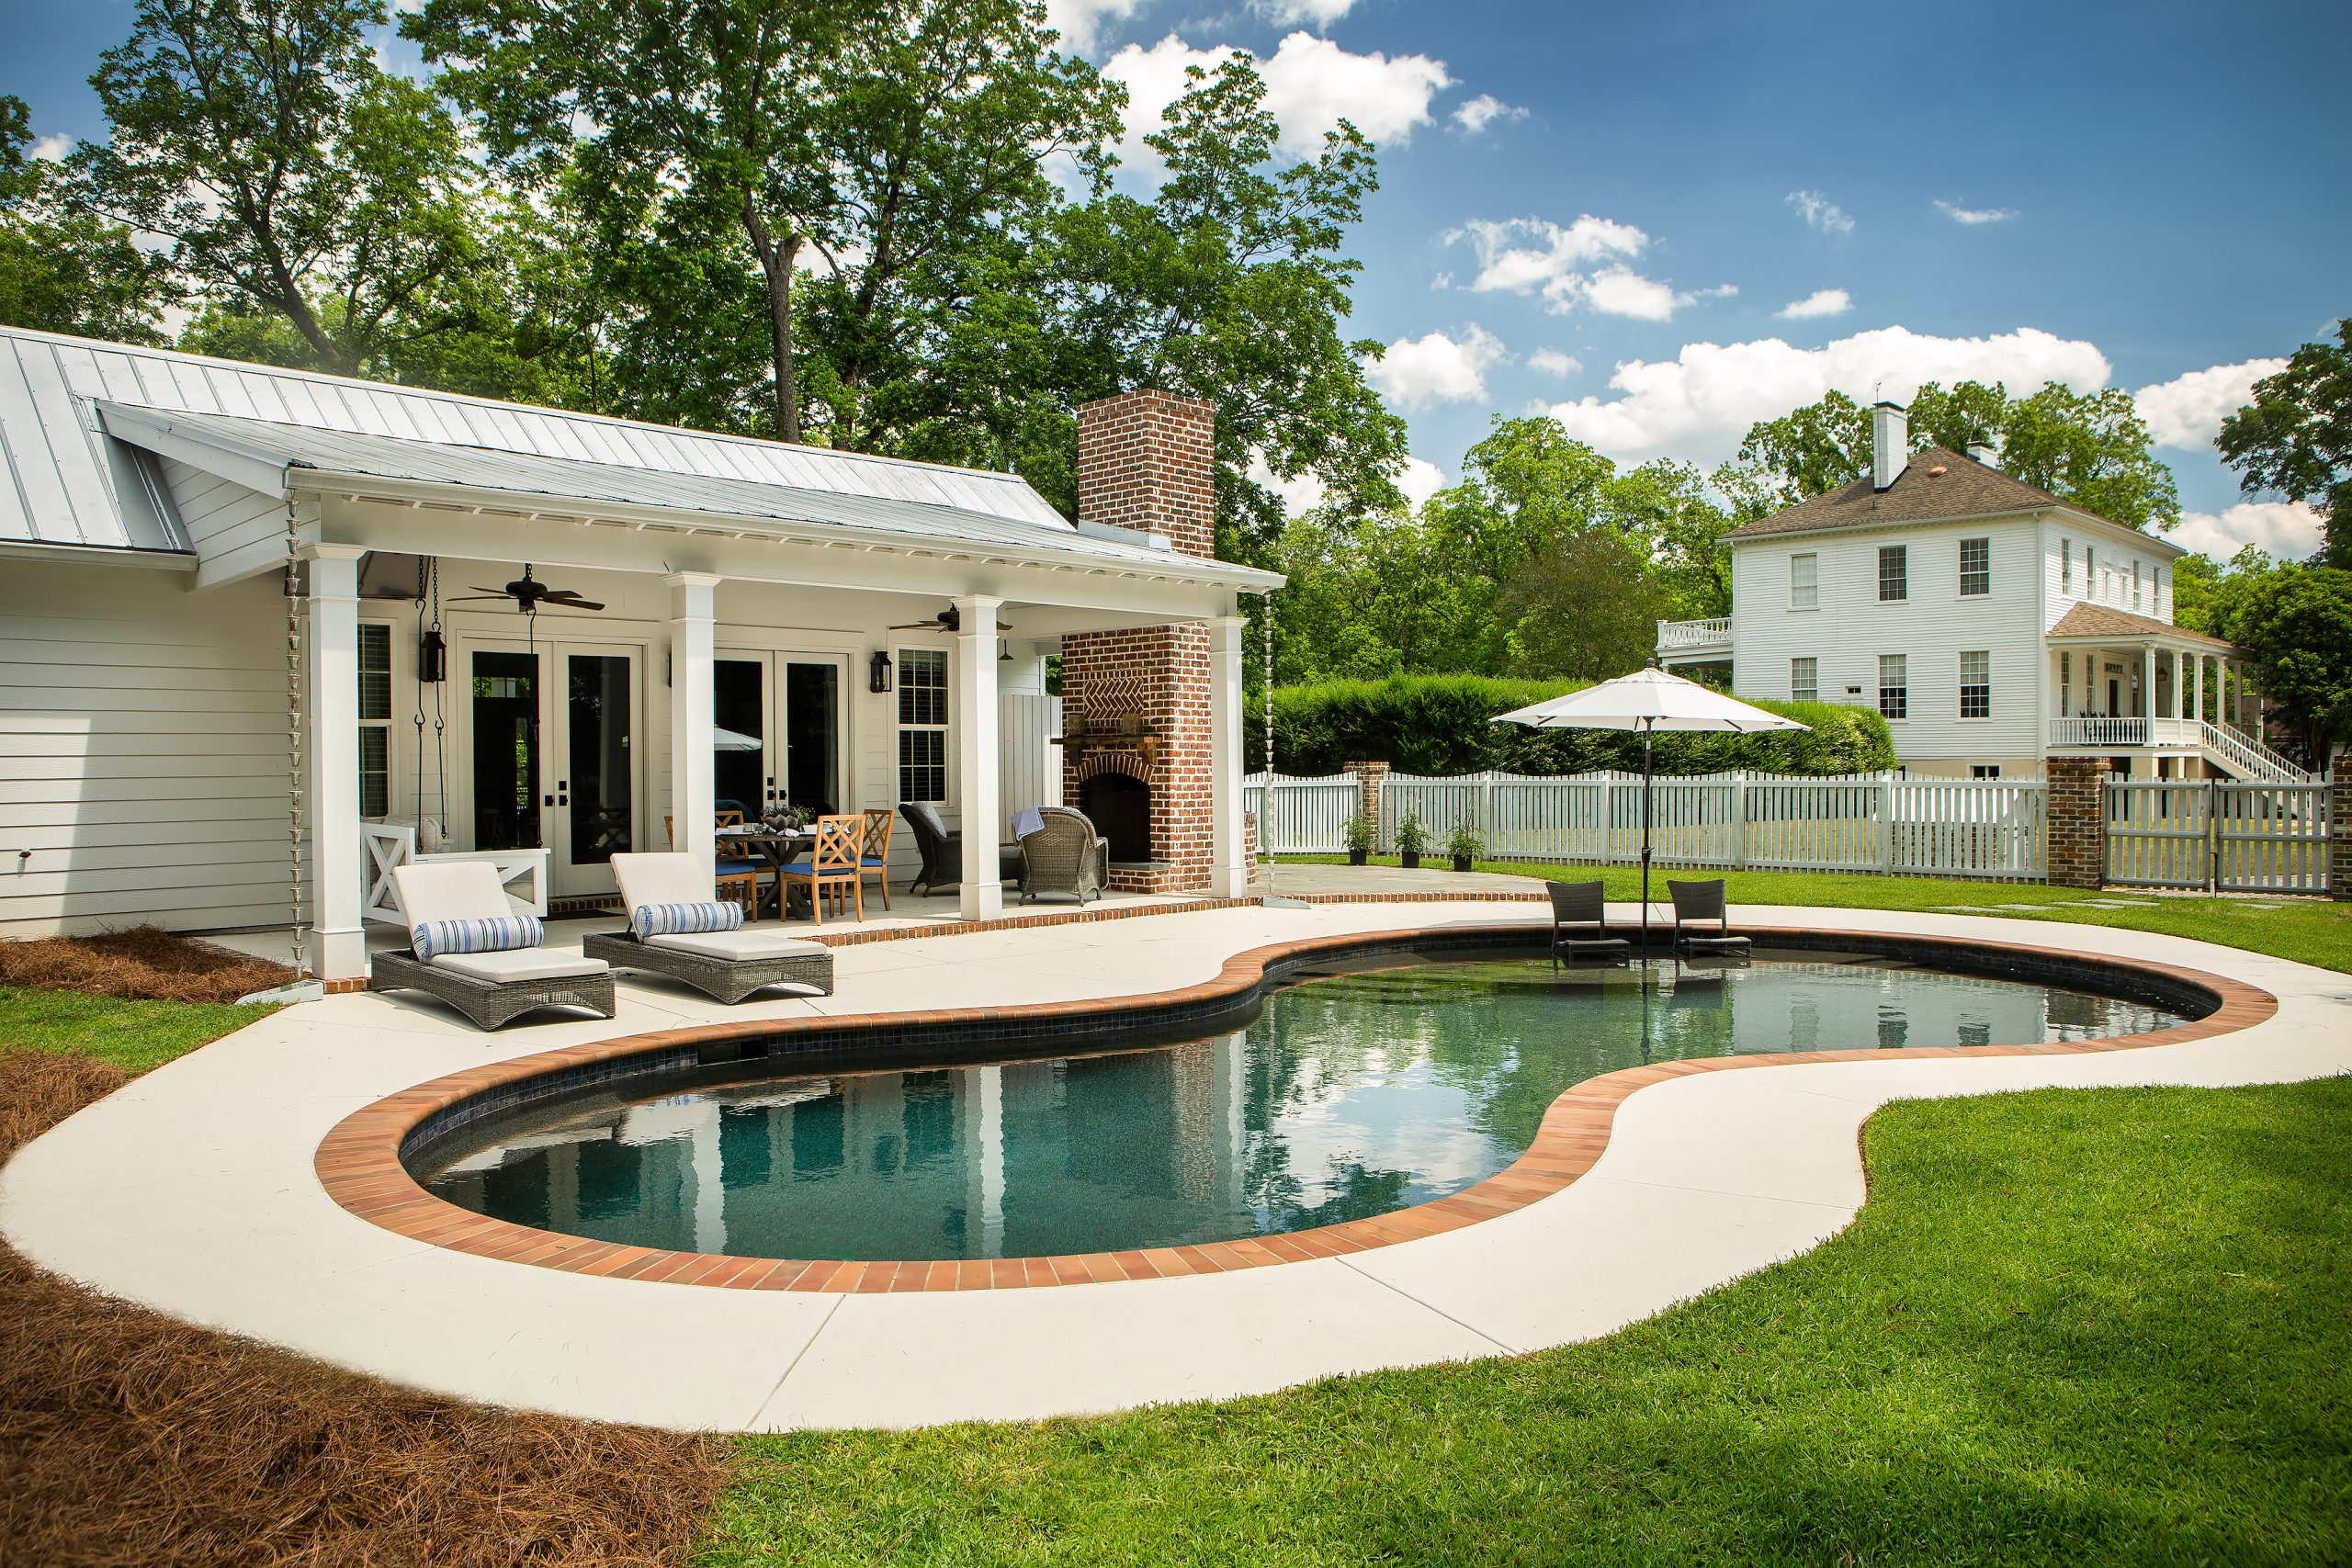 Two years ago, the Barnwells added a pool and pool house in the back yard. Landscape architects Ken Simmons and Drew Cheatham designed the structure to complement the historic buildings.